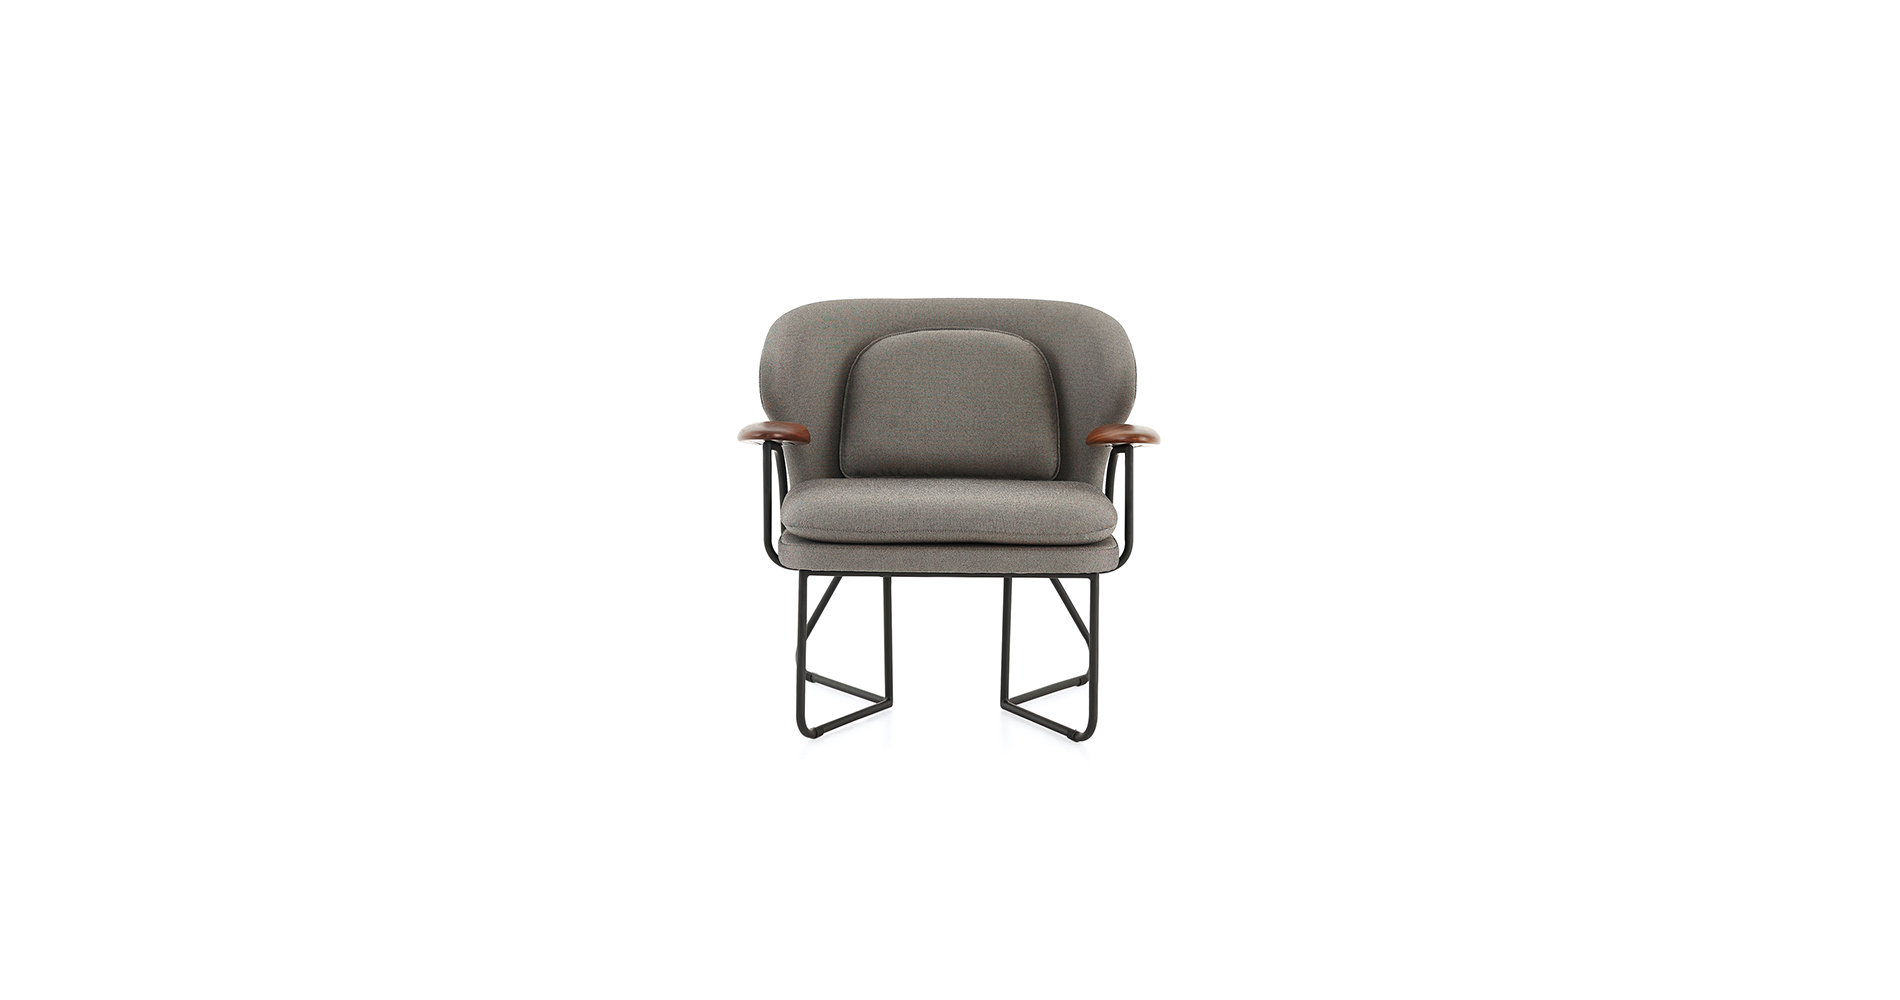 An image of Chillax Lounge Chair